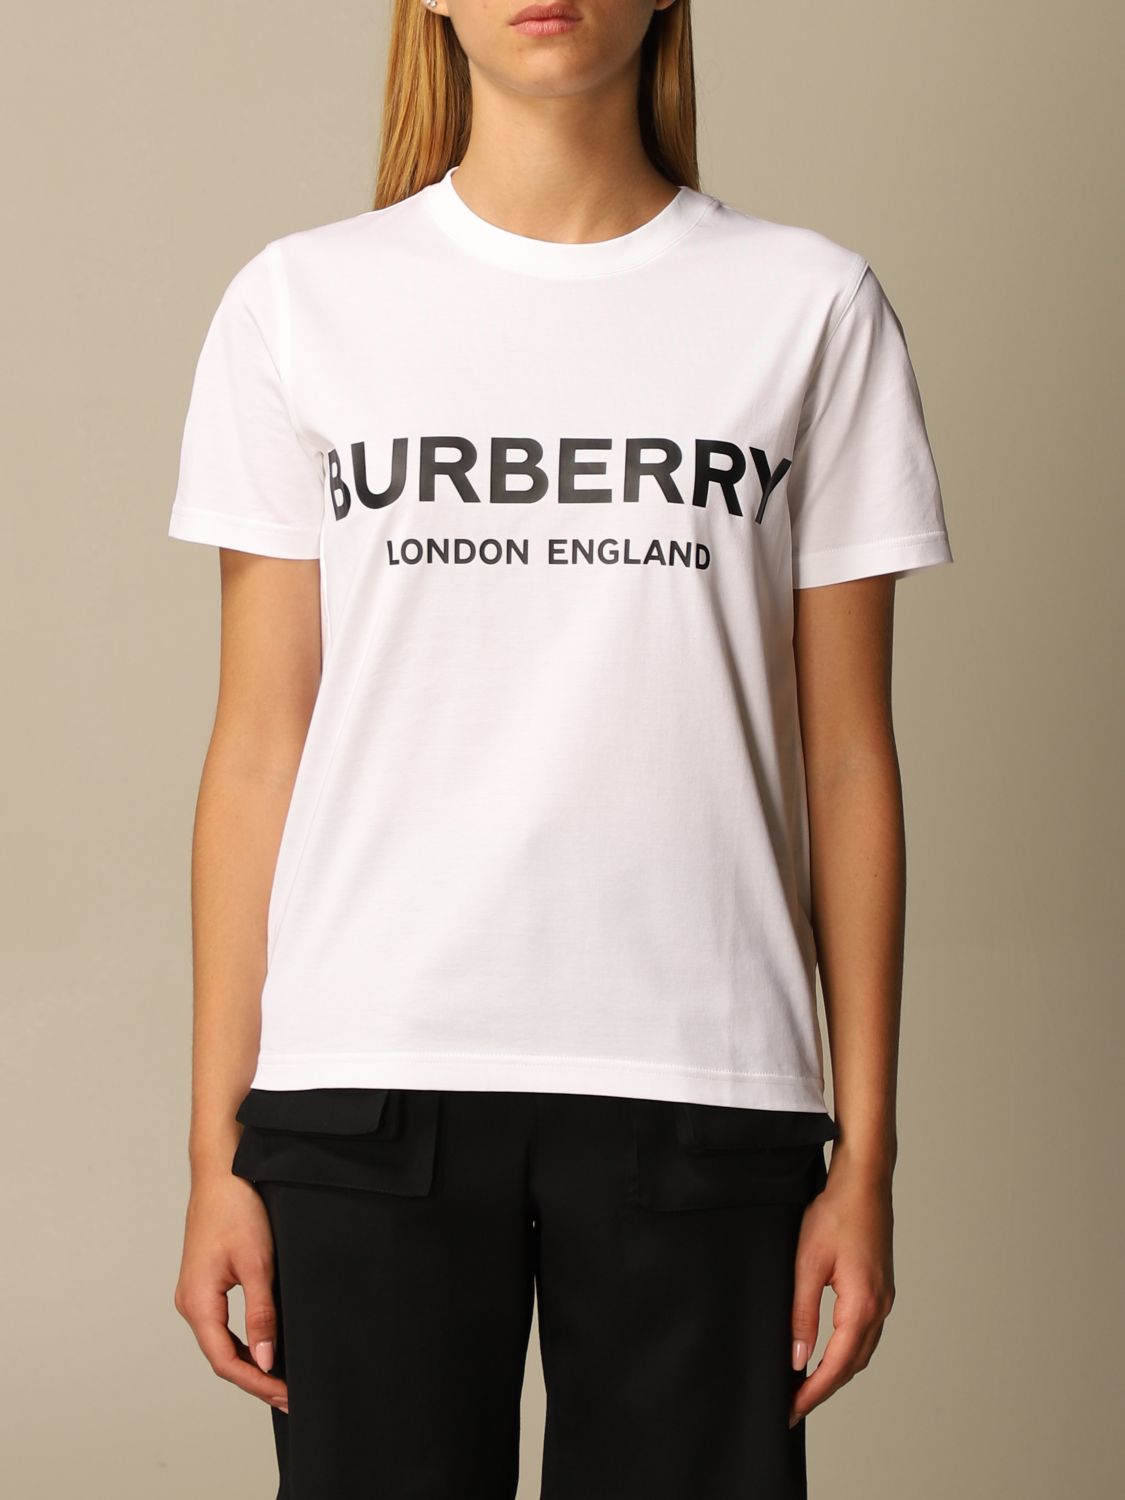 BURBERRY: Shotover t-shirt in stretch cotton with logo - White | Burberry t- shirt 8008894 online on 